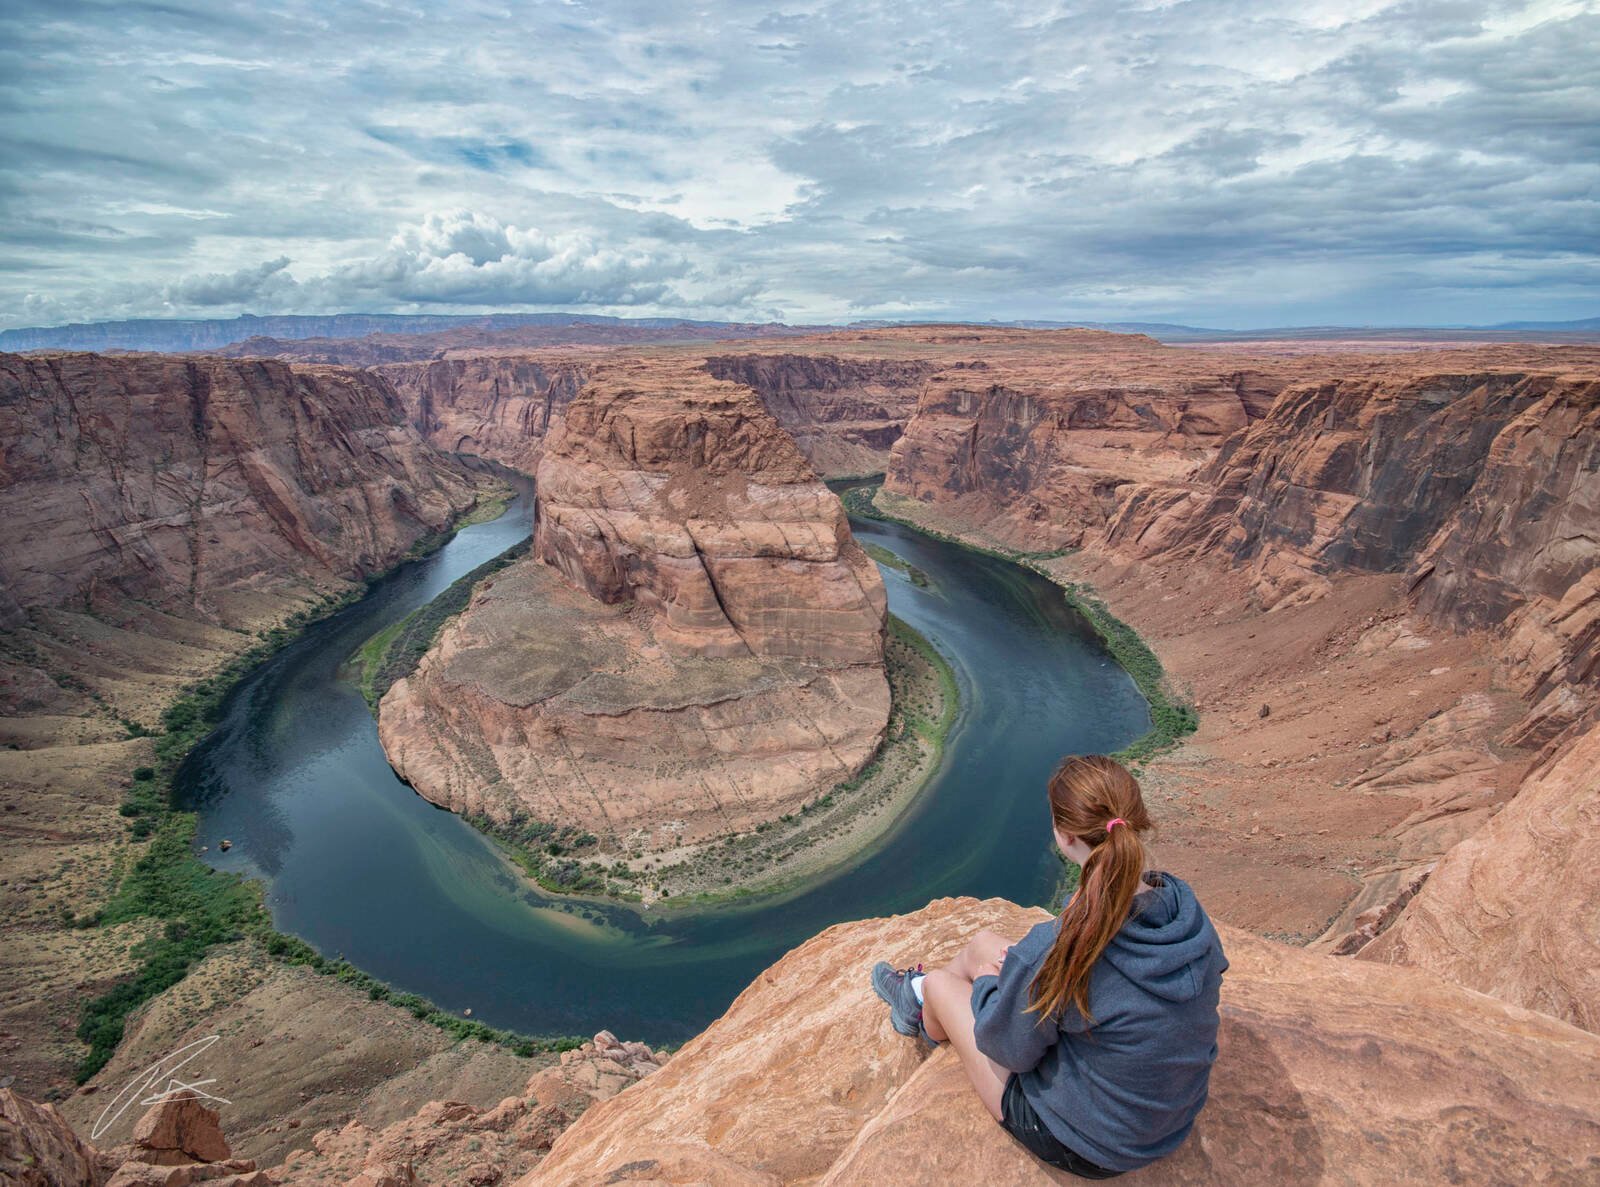 Image of Horseshoe Bend by Patrick Hulley